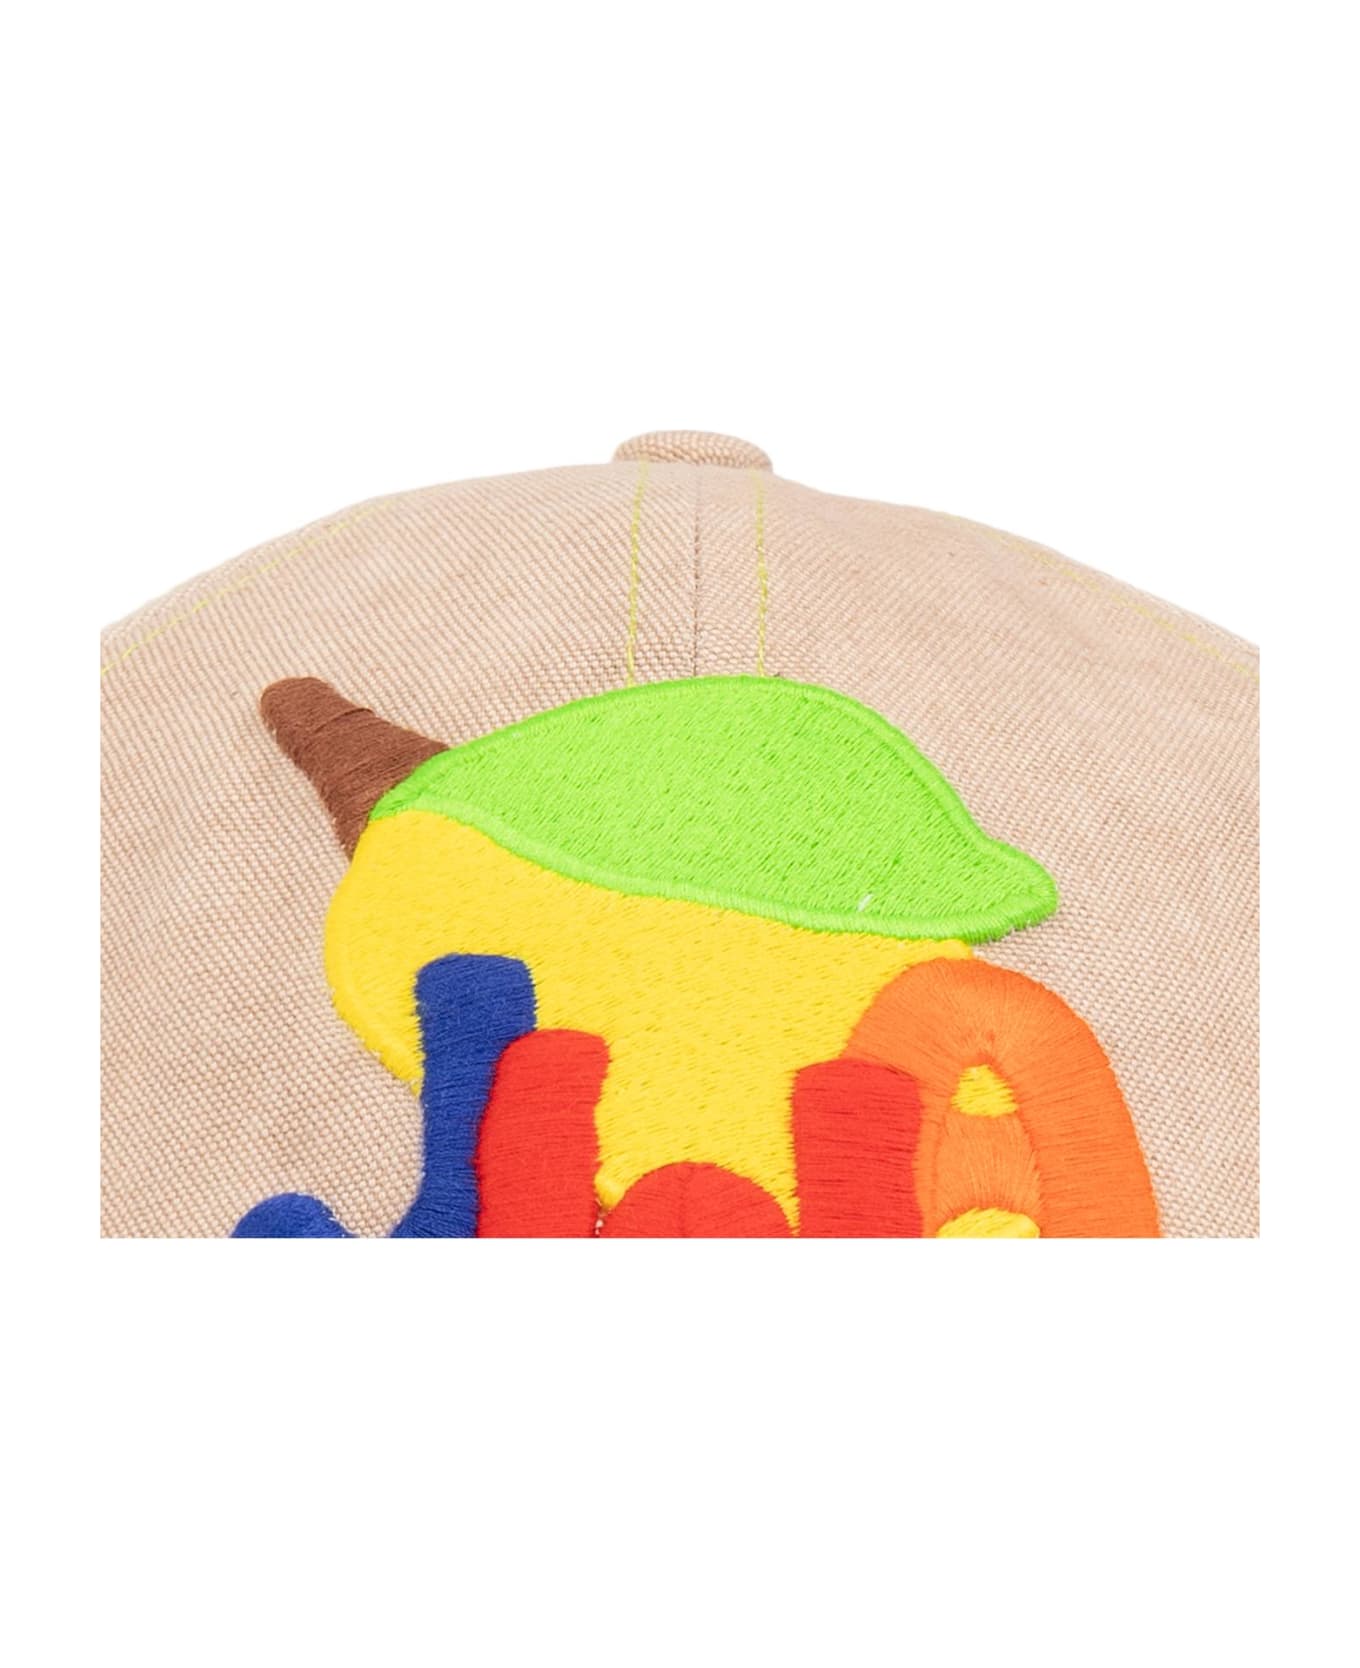 J.W. Anderson Jw Anderson Patched Baseball Cap - Beige